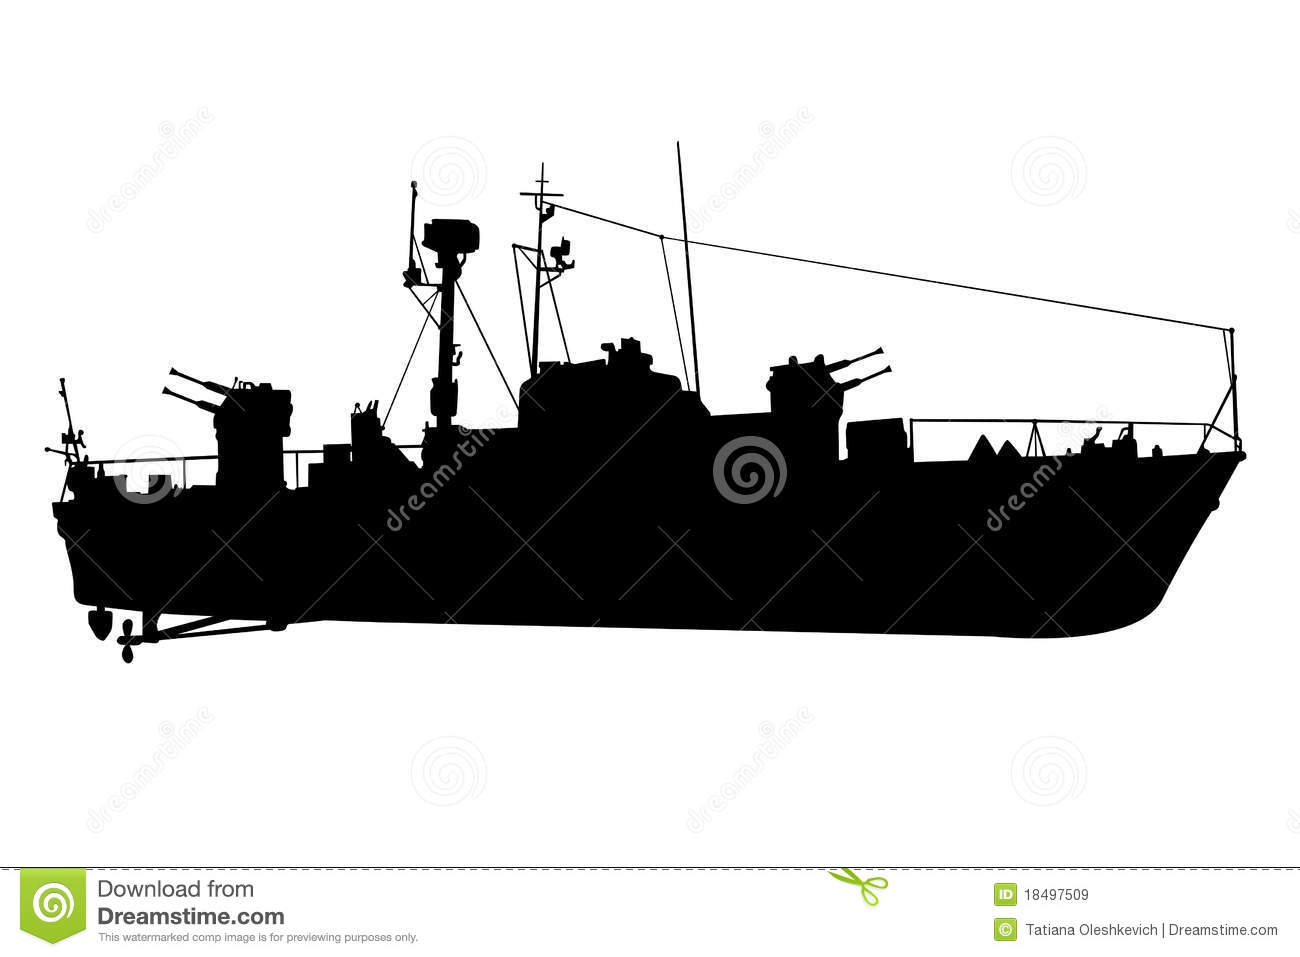 Scout Battleship Black Silhouette Royalty Free Stock Images   Image    